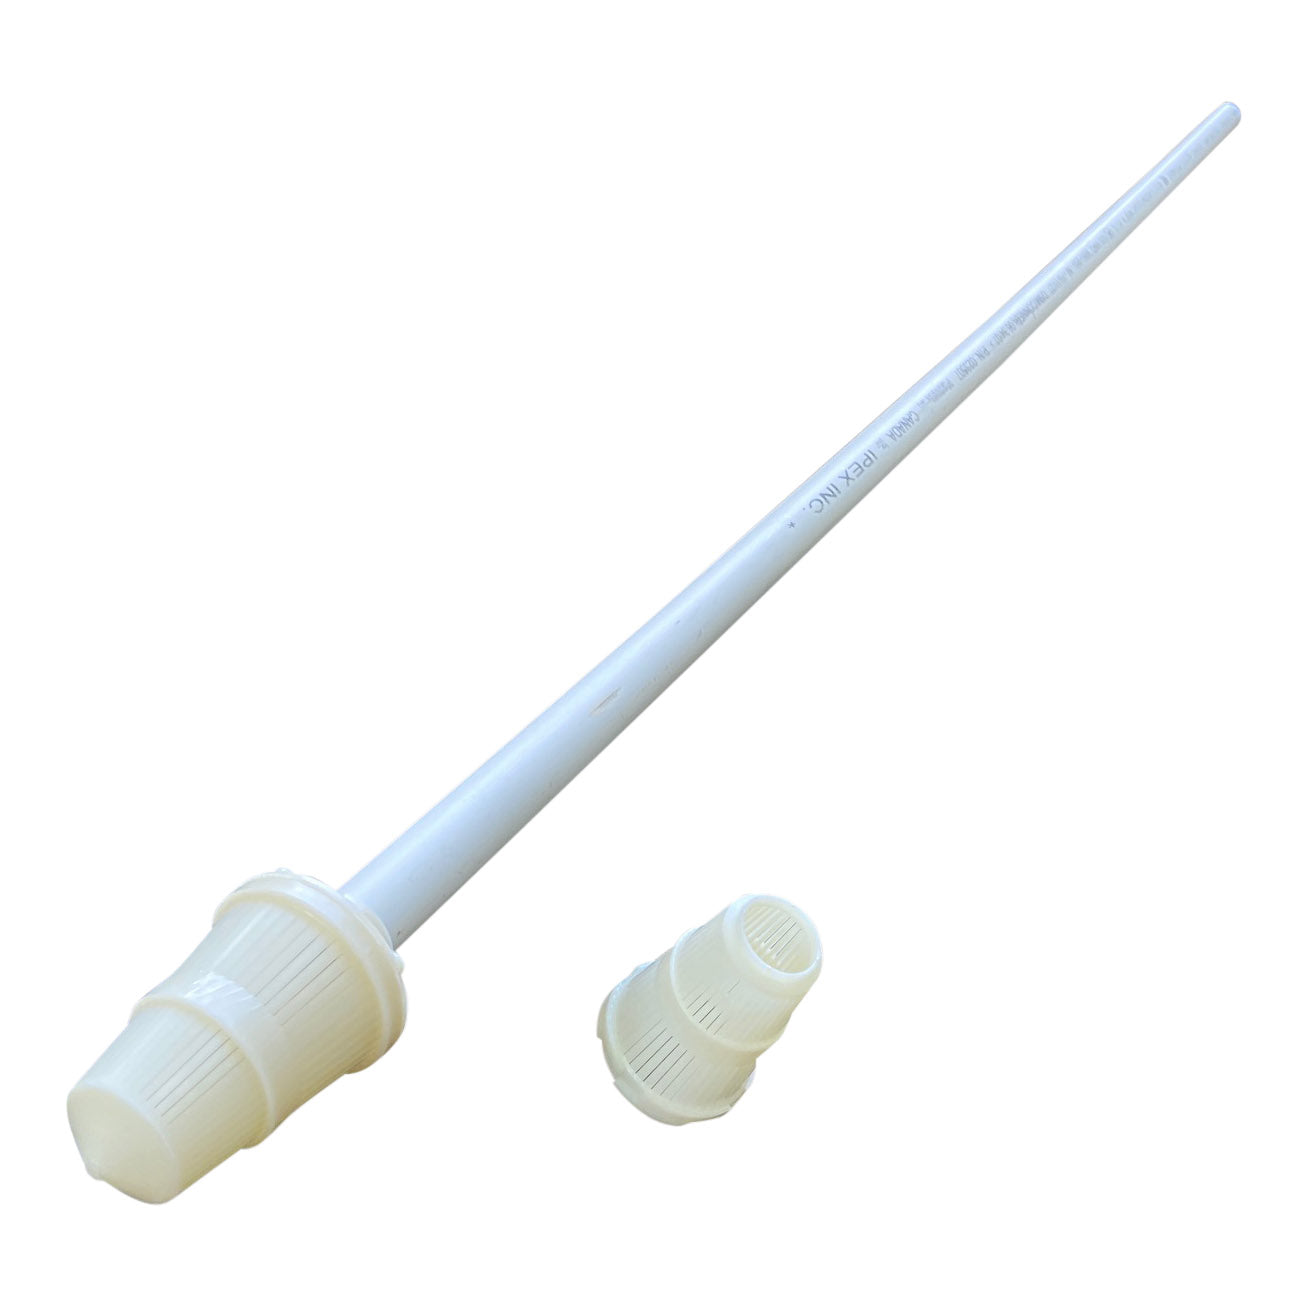 HUM Water Filtration Riser Tube 1" x 54" and 1" Upper Cone Screen Replacement Combo